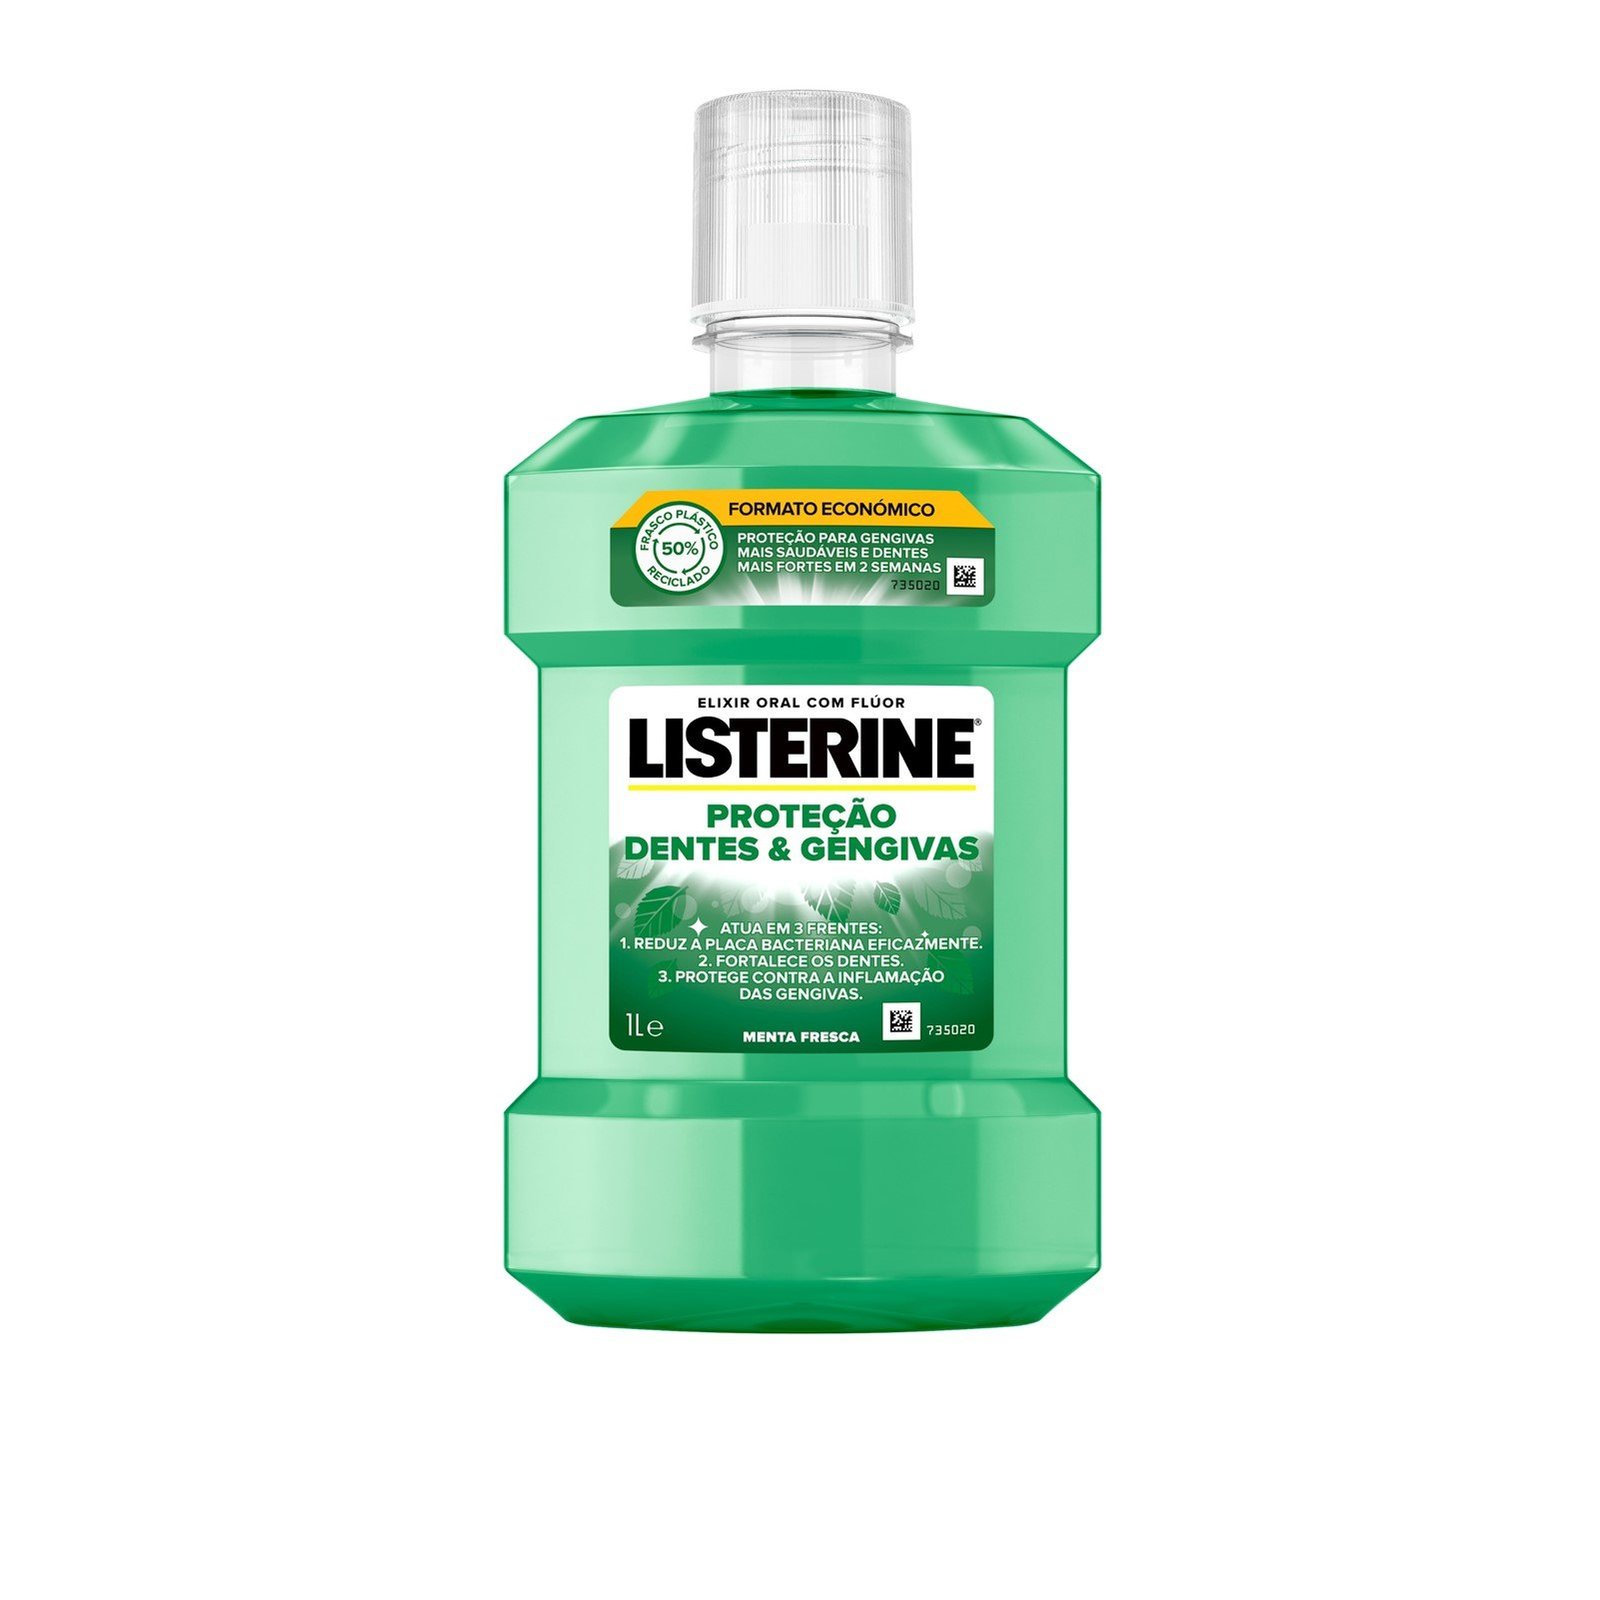 Listerine Teeth And Gum Protection Mouthwash 1L